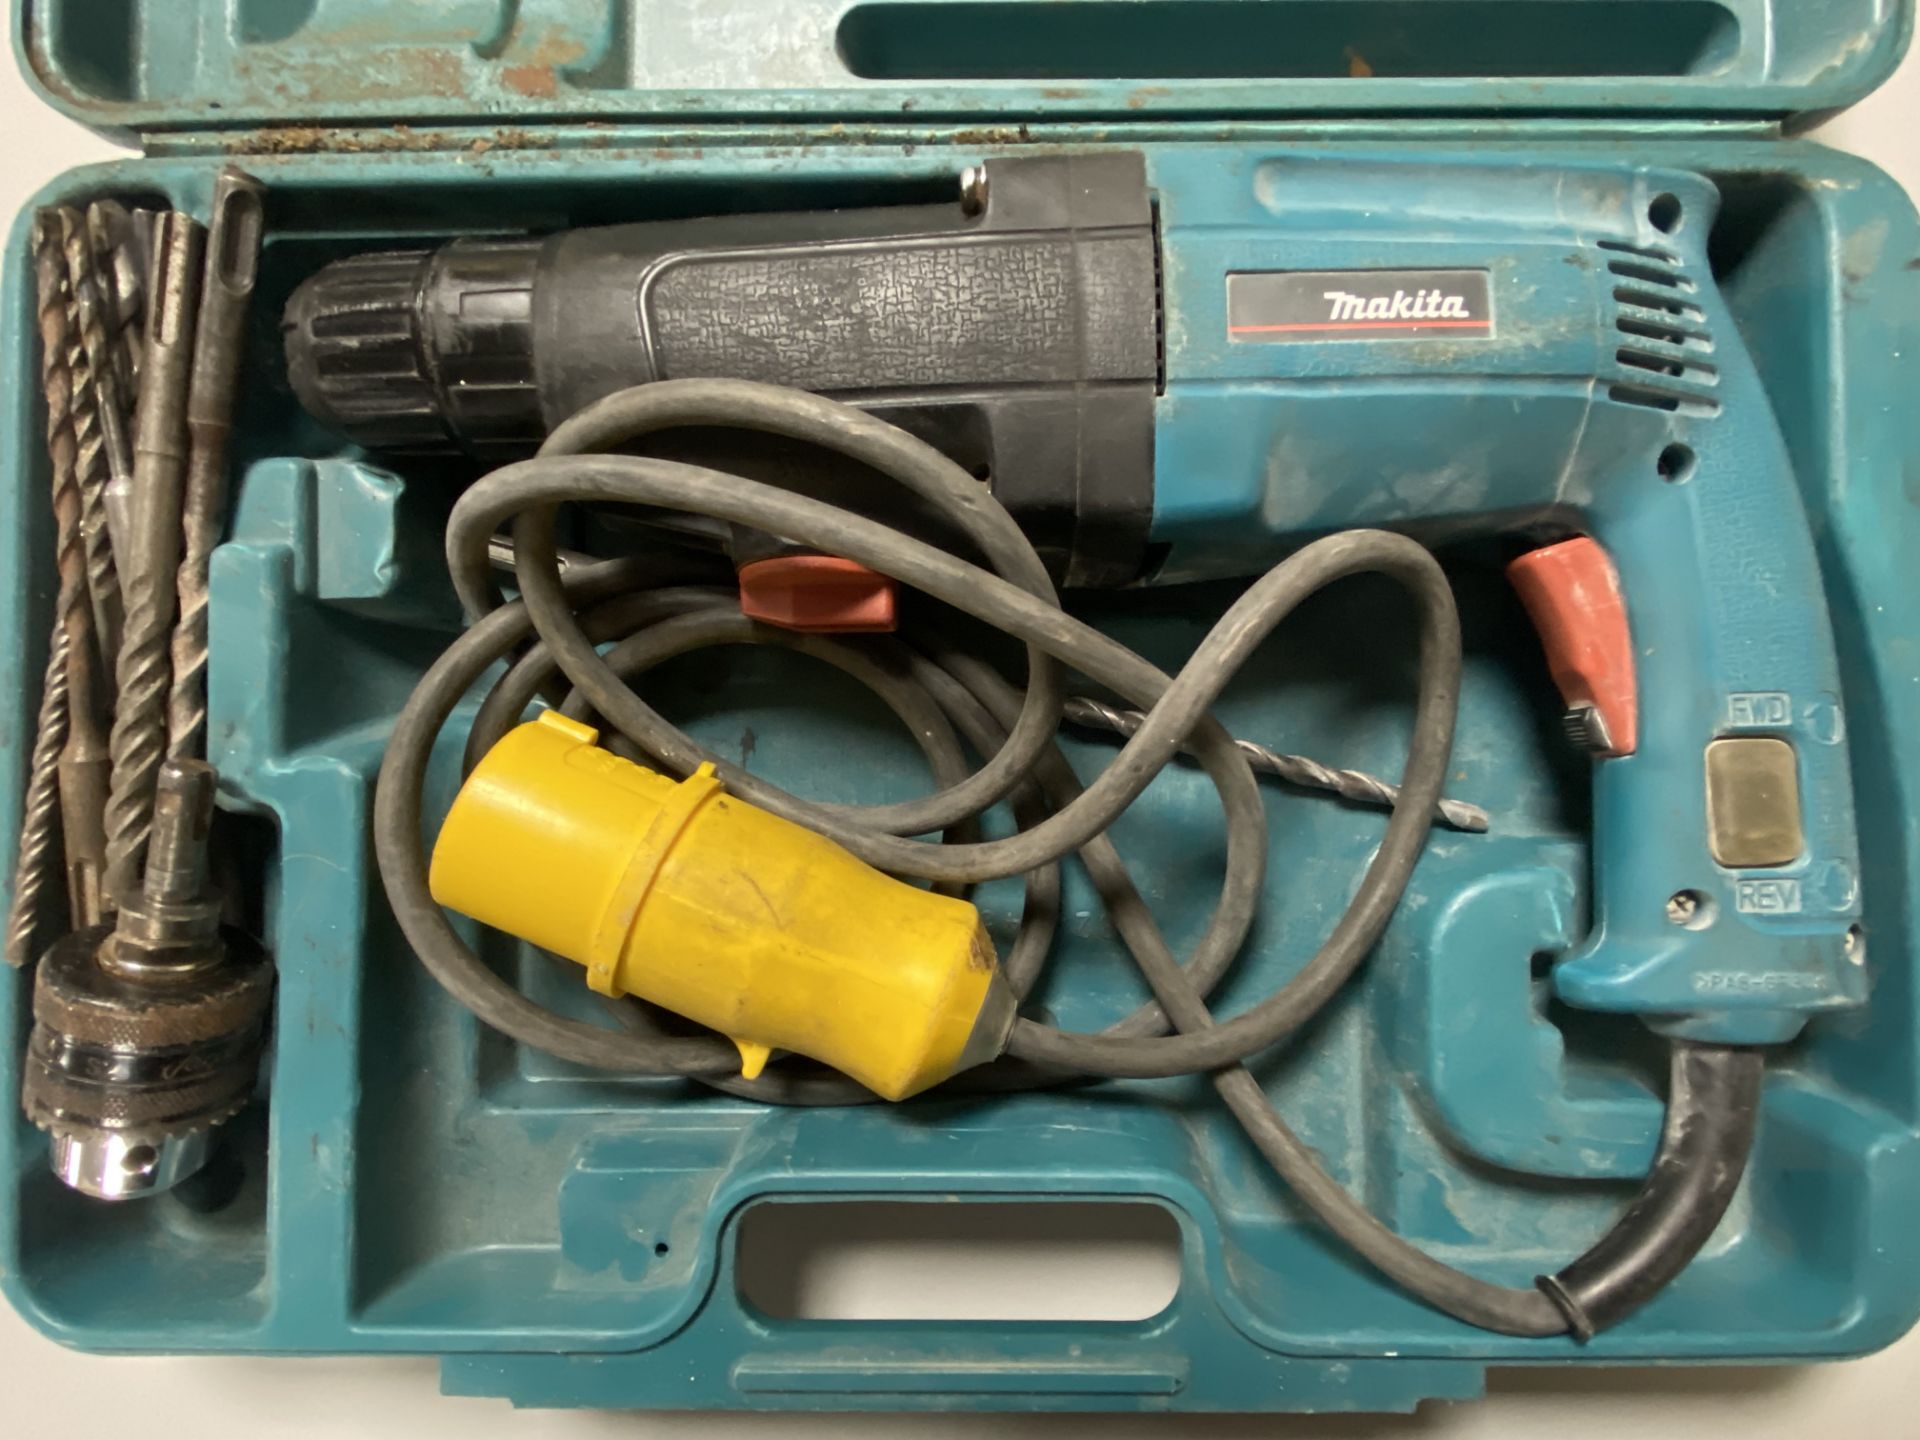 Makita HR2400 110v Rotary Hammer Drill with Carry Case and Various Accessories and Drillbits as - Image 2 of 5